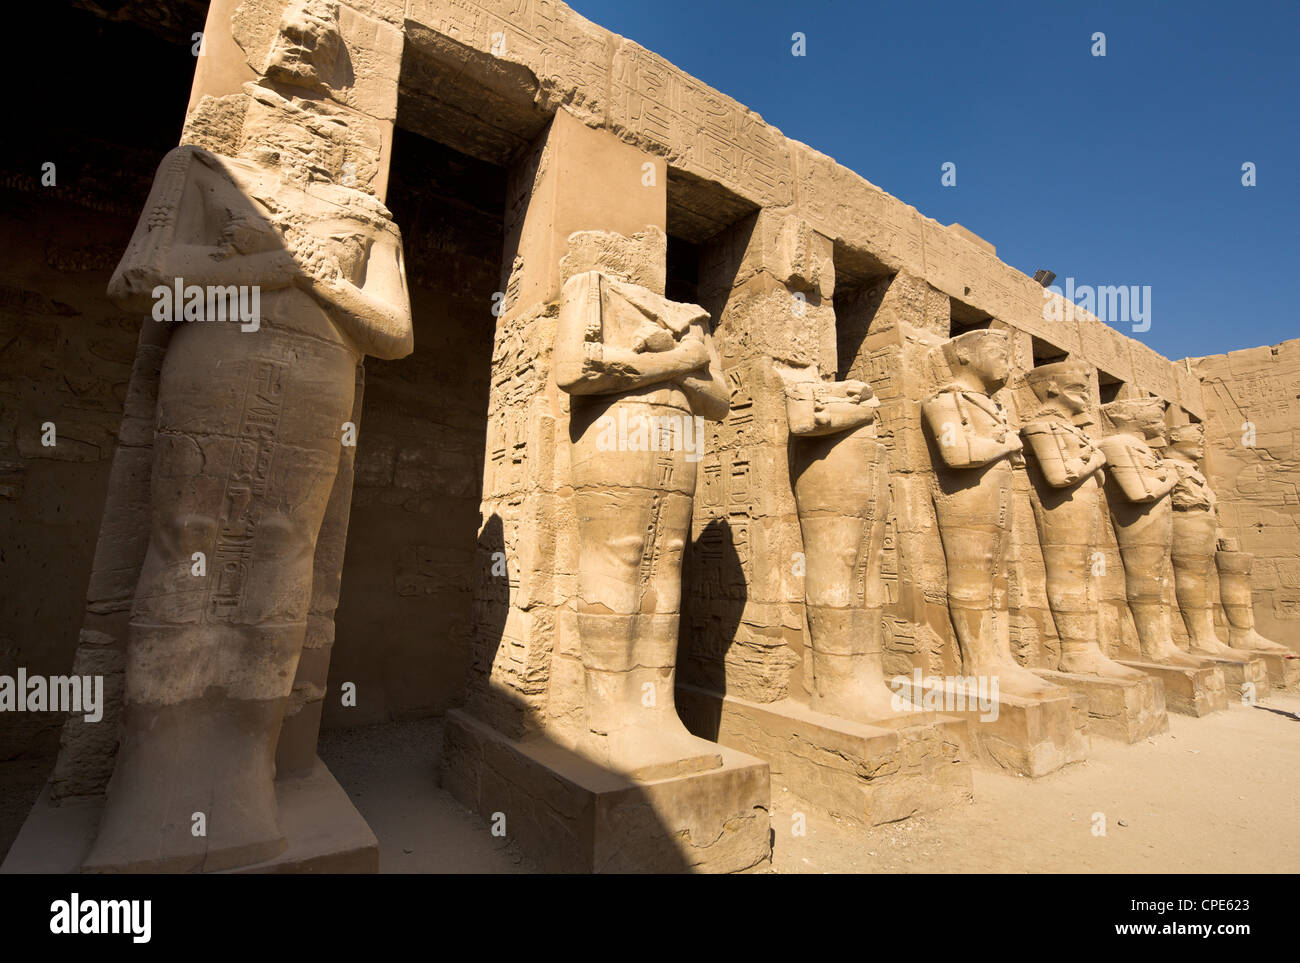 Temple of Ramesses III at Karnak, Thebes, UNESCO World Heritage Site, Egypt, North Africa, Africa Stock Photo